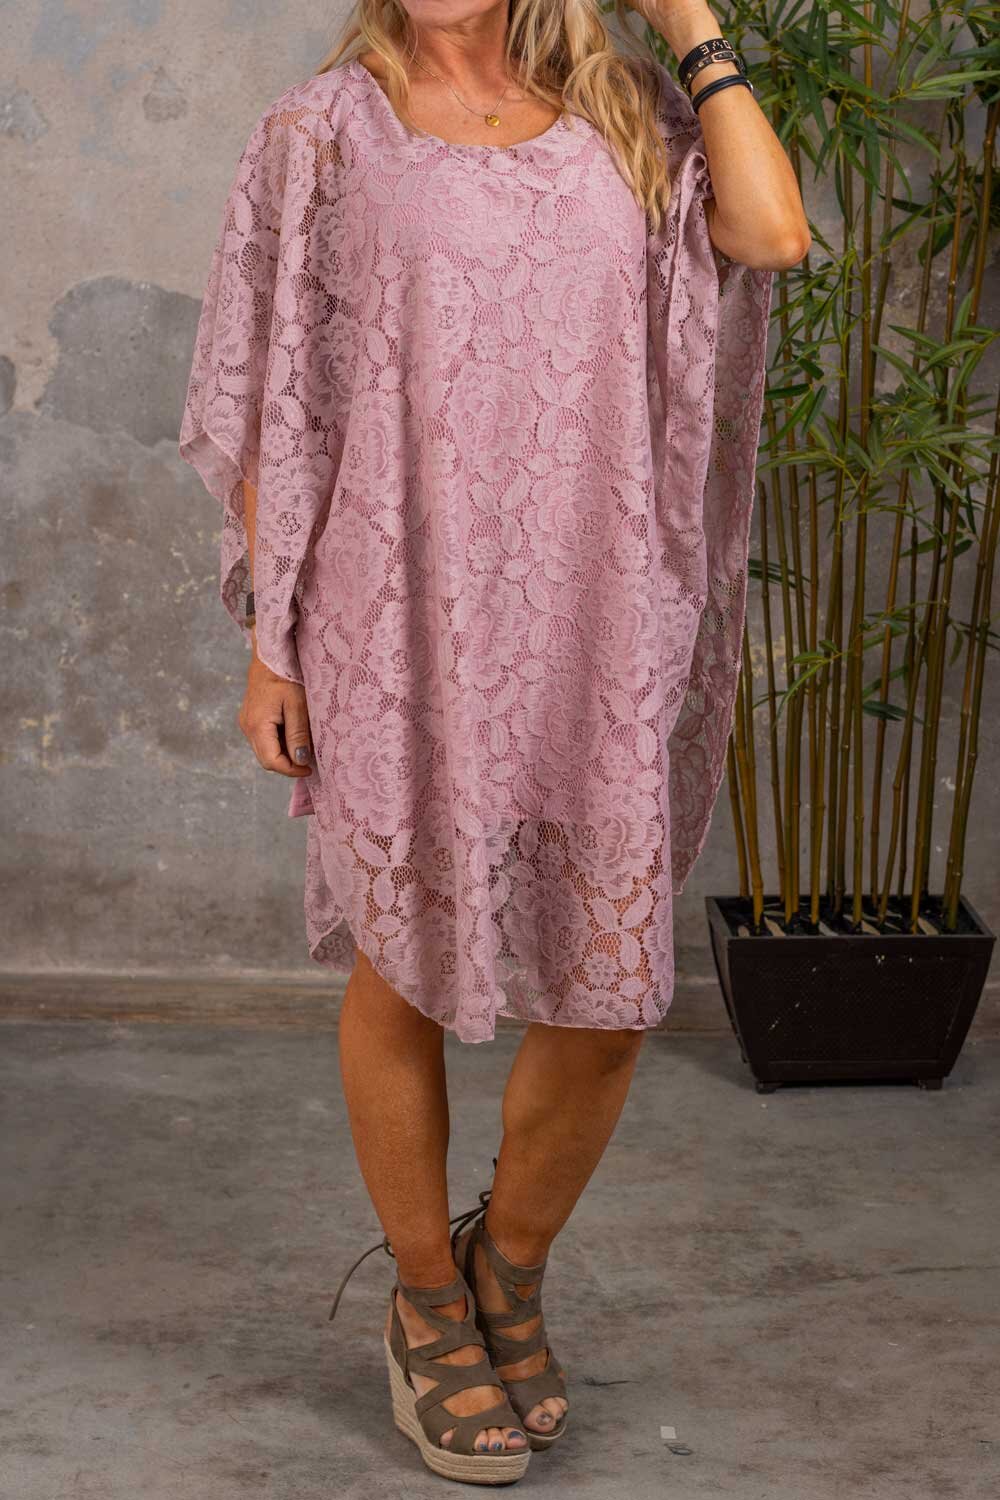 Jamie - Lace dress - Old pink